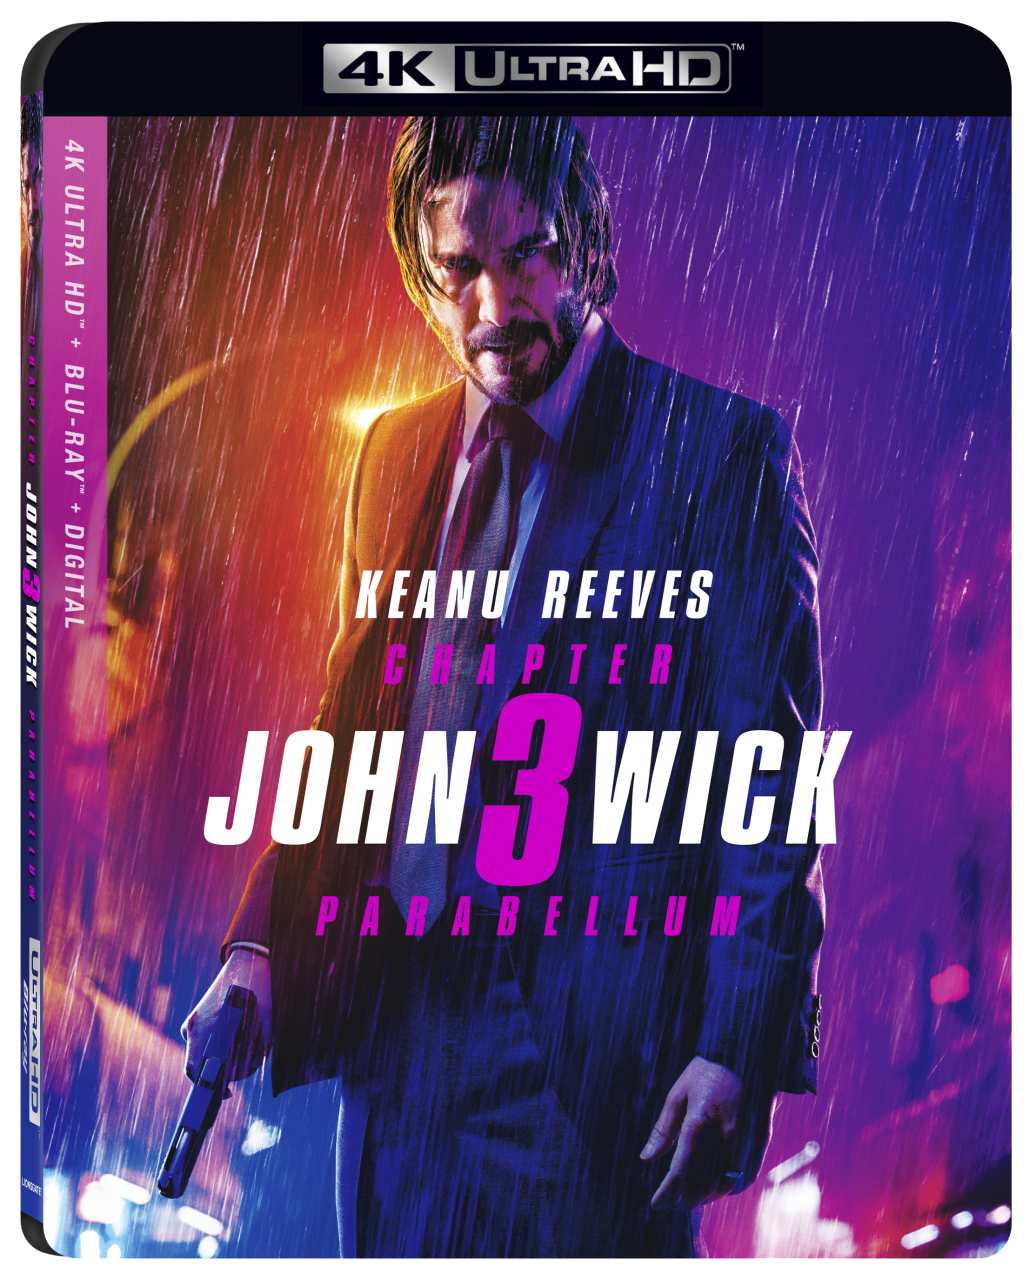 John Wick: Chapter 3 - Parabellum 4K Ultra HD Combo Pack cover (Lionsgate Home Entertainment)